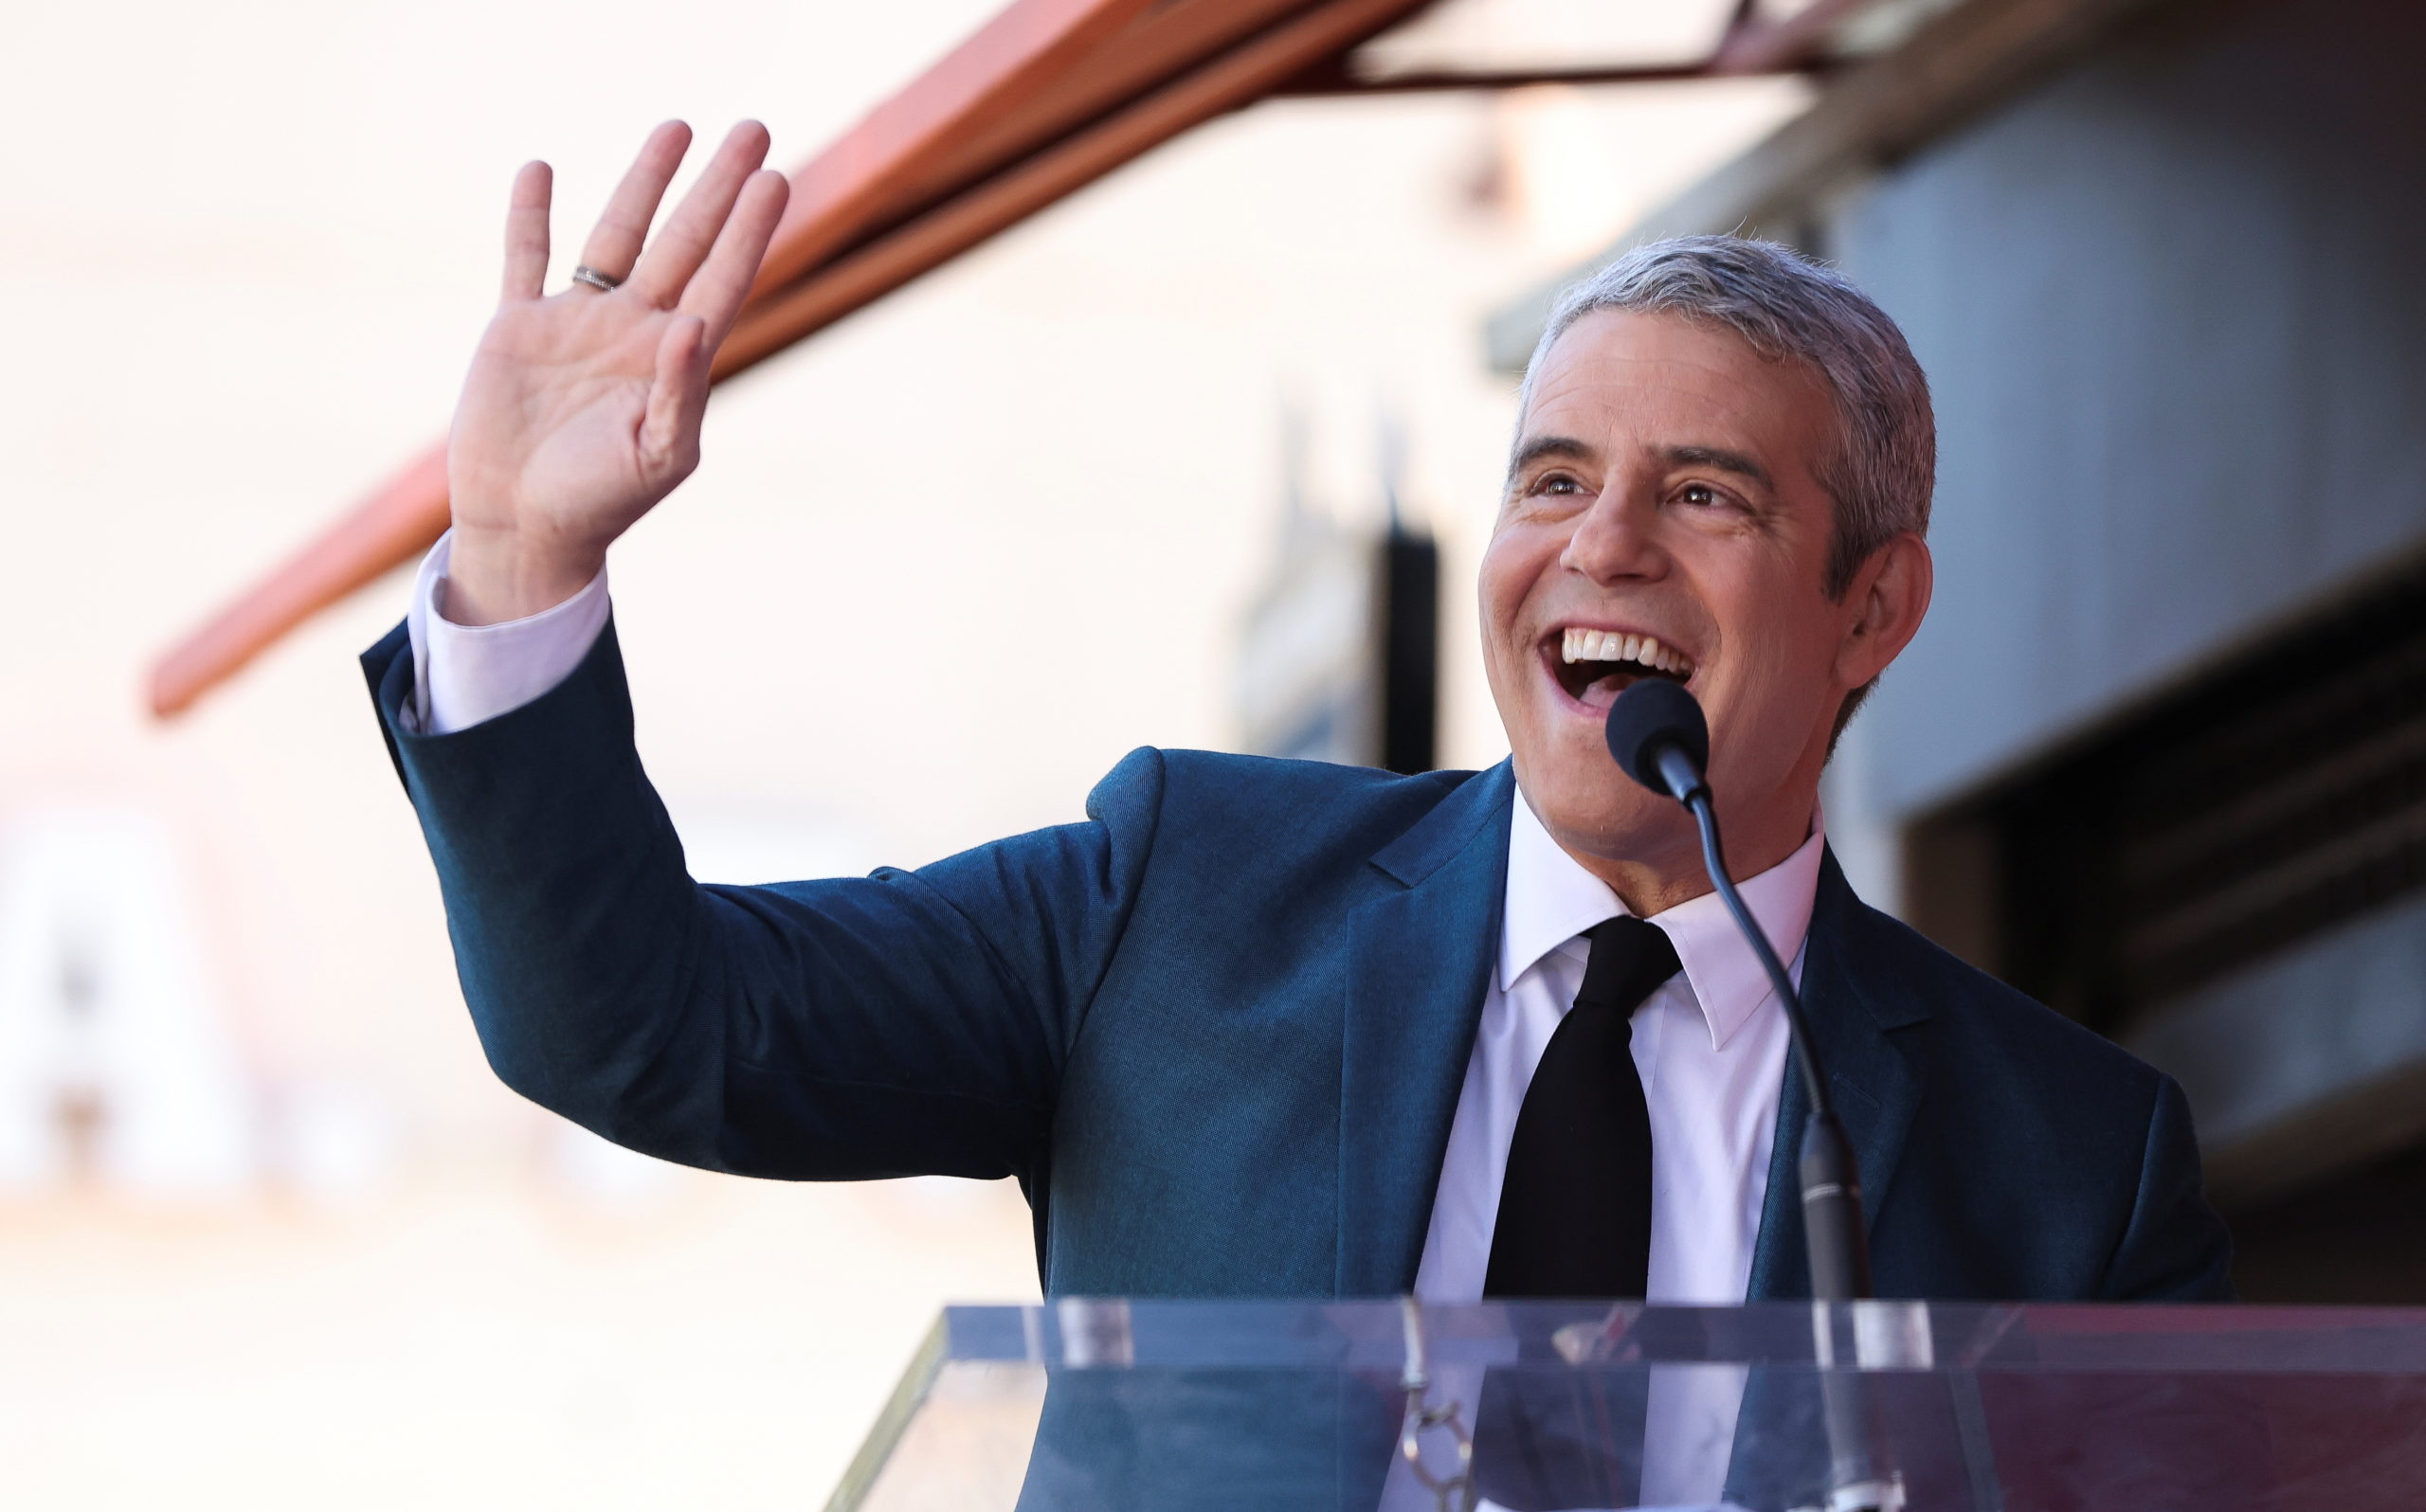 Television host Andy Cohen speaks prior to unveiling of his star on the Hollywood Walk of Fame in Los Angeles, California, U.S., February 4, 2022. REUTERS/Mario Anzuoni